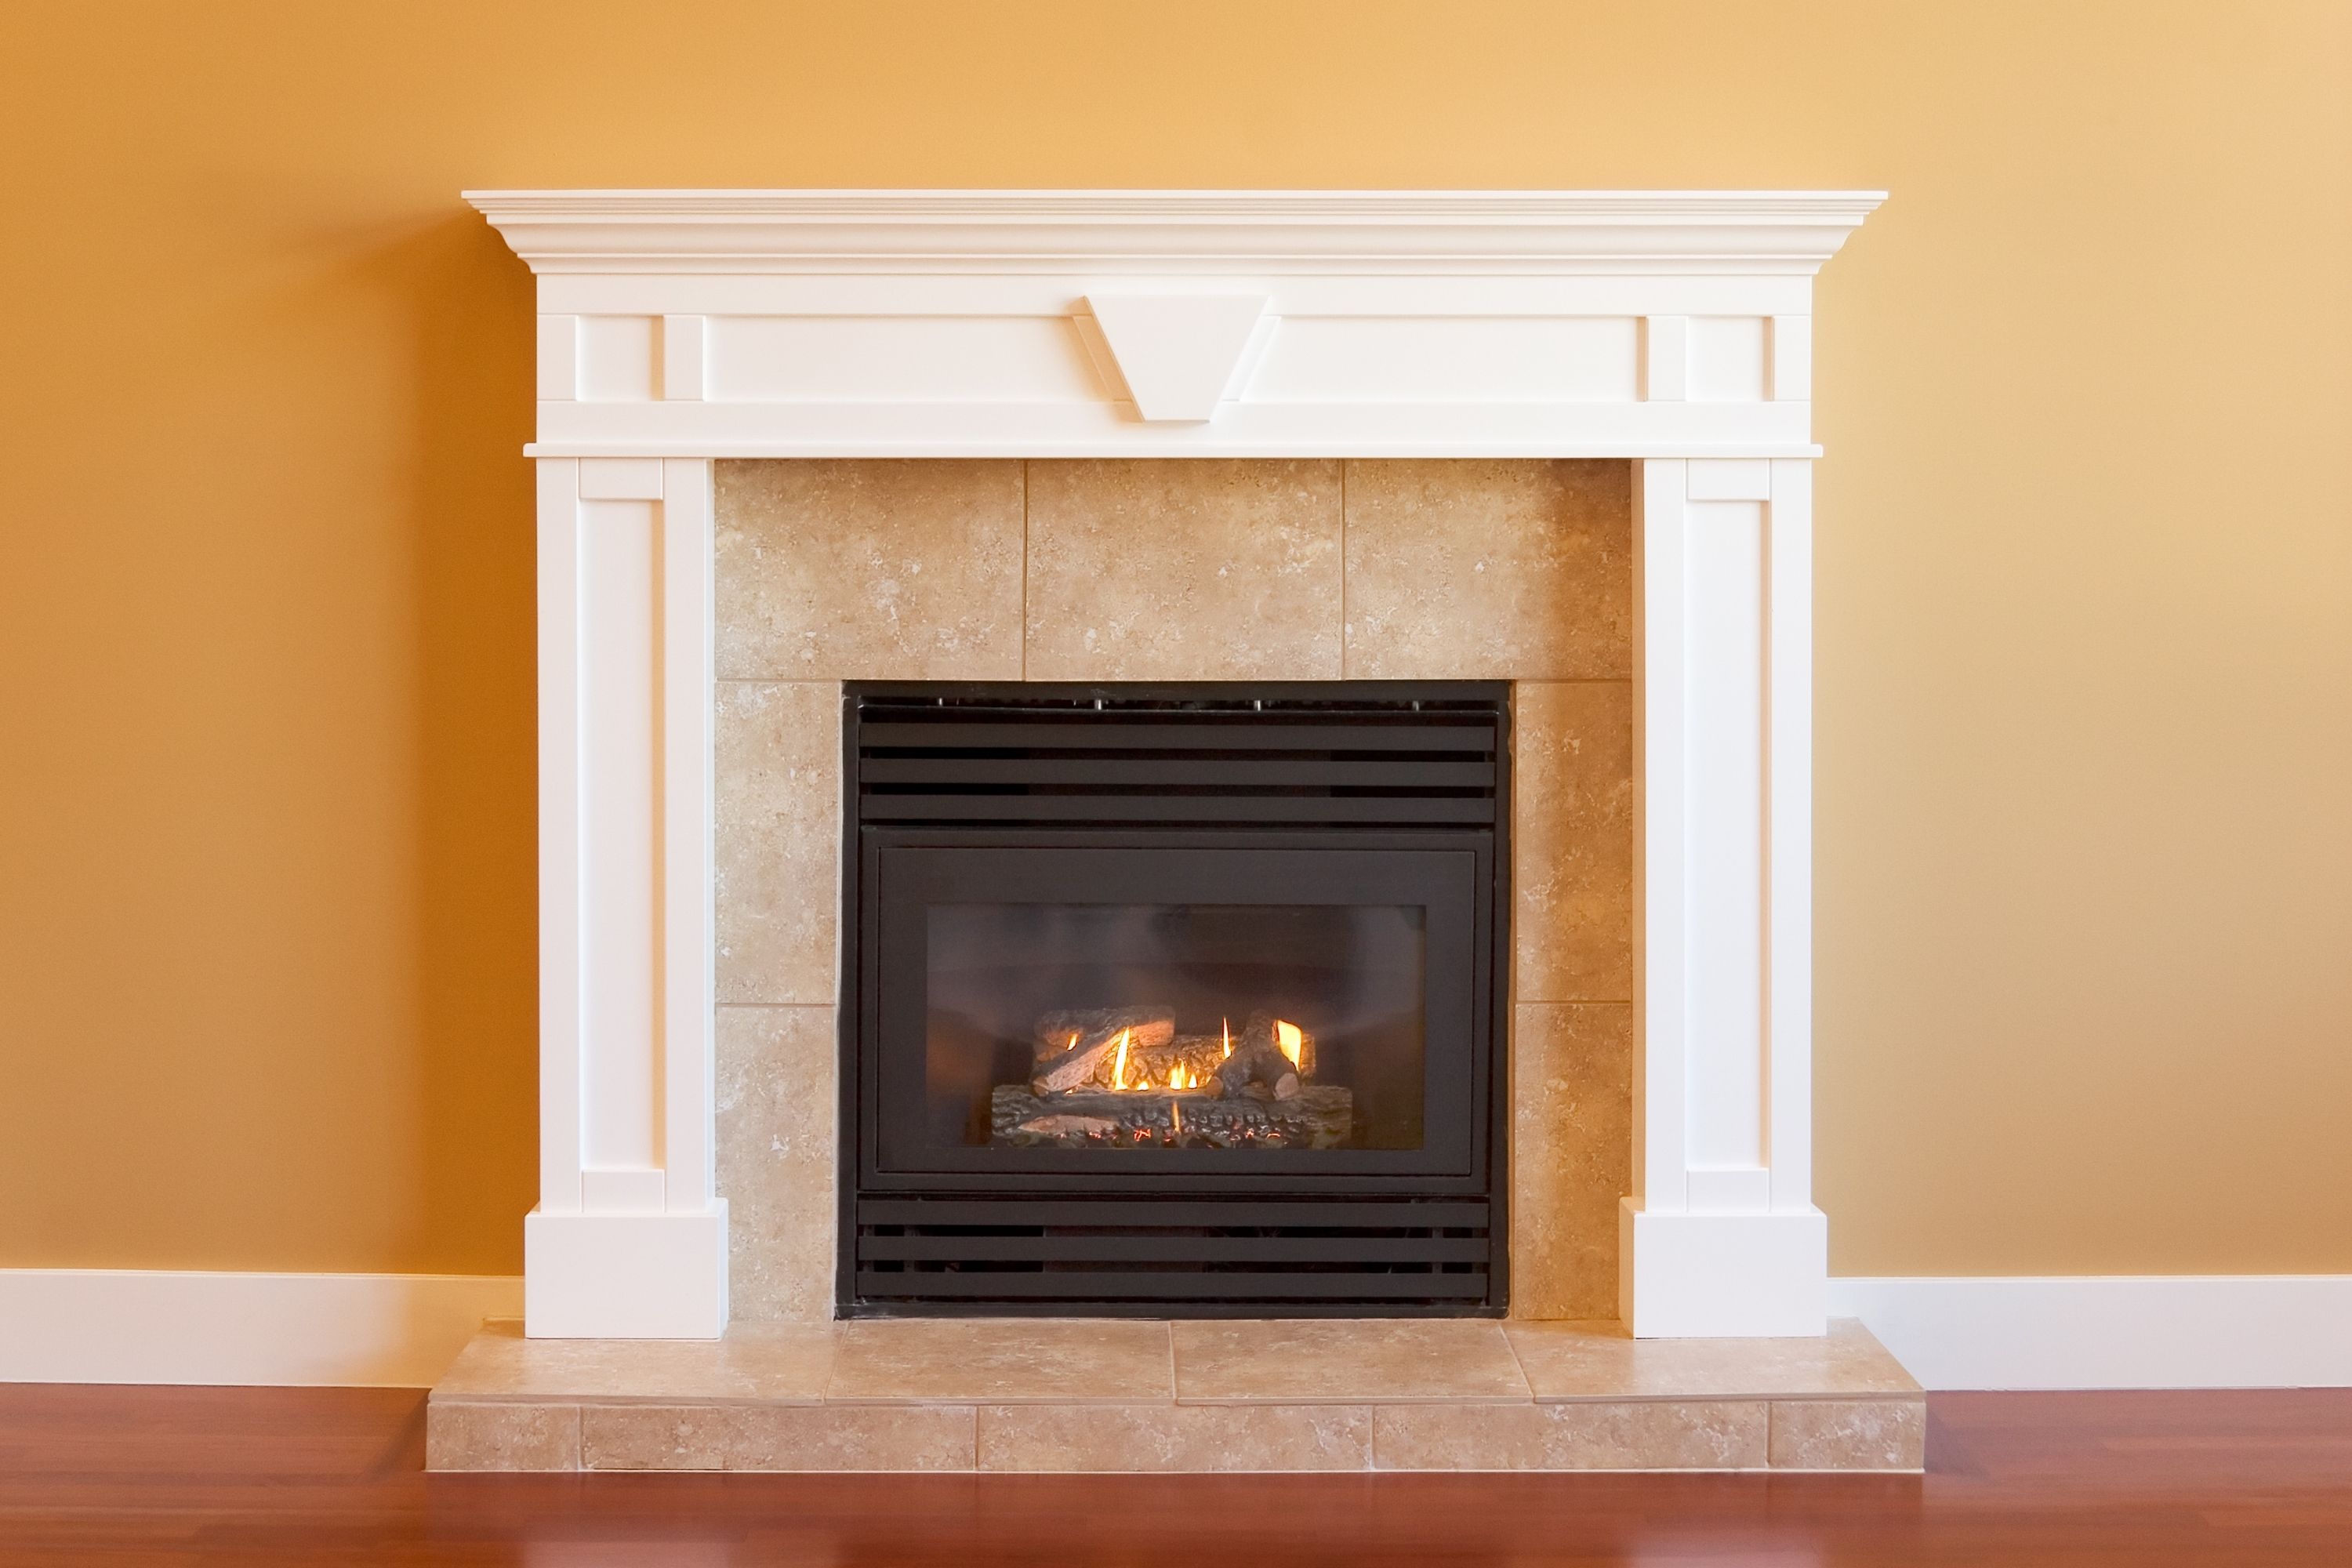 How to Get More Heat From Your Gas Fireplace